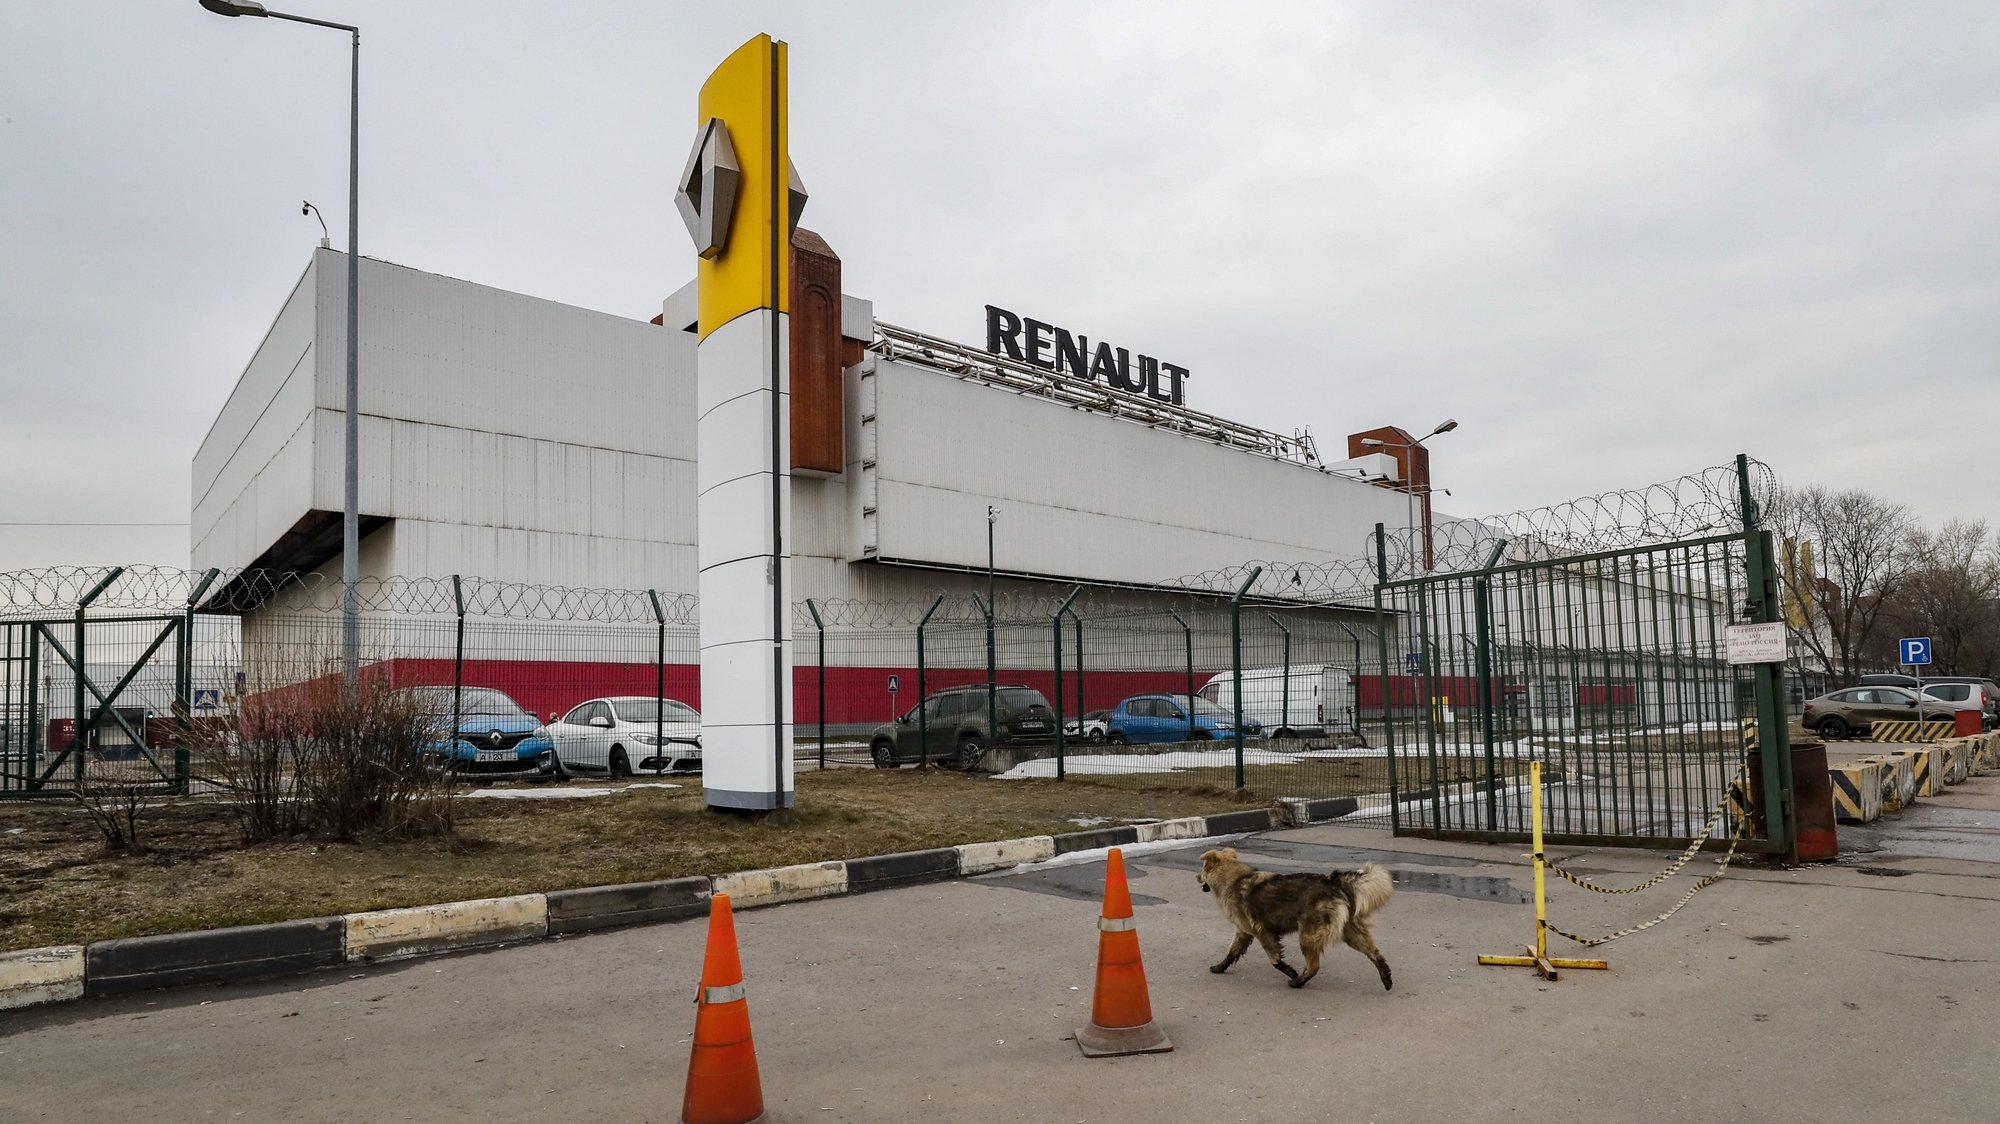 epa09848686 Exterior view of the Renault Group plant in Moscow, Russia, 25 March 2022. The Renault Group has announced that it is suspending the operation of its plant in Moscow. CJSC Renault Russia was created in 1998 as a joint venture between Renault and the Moscow government and subsequently bought out completely by the French by the end of 2012. The company produced crossovers Renault Duster, Renault Kaptur, Nissan Terrano, and coupe-crossover Renault Arkana.  EPA/YURI KOCHETKOV